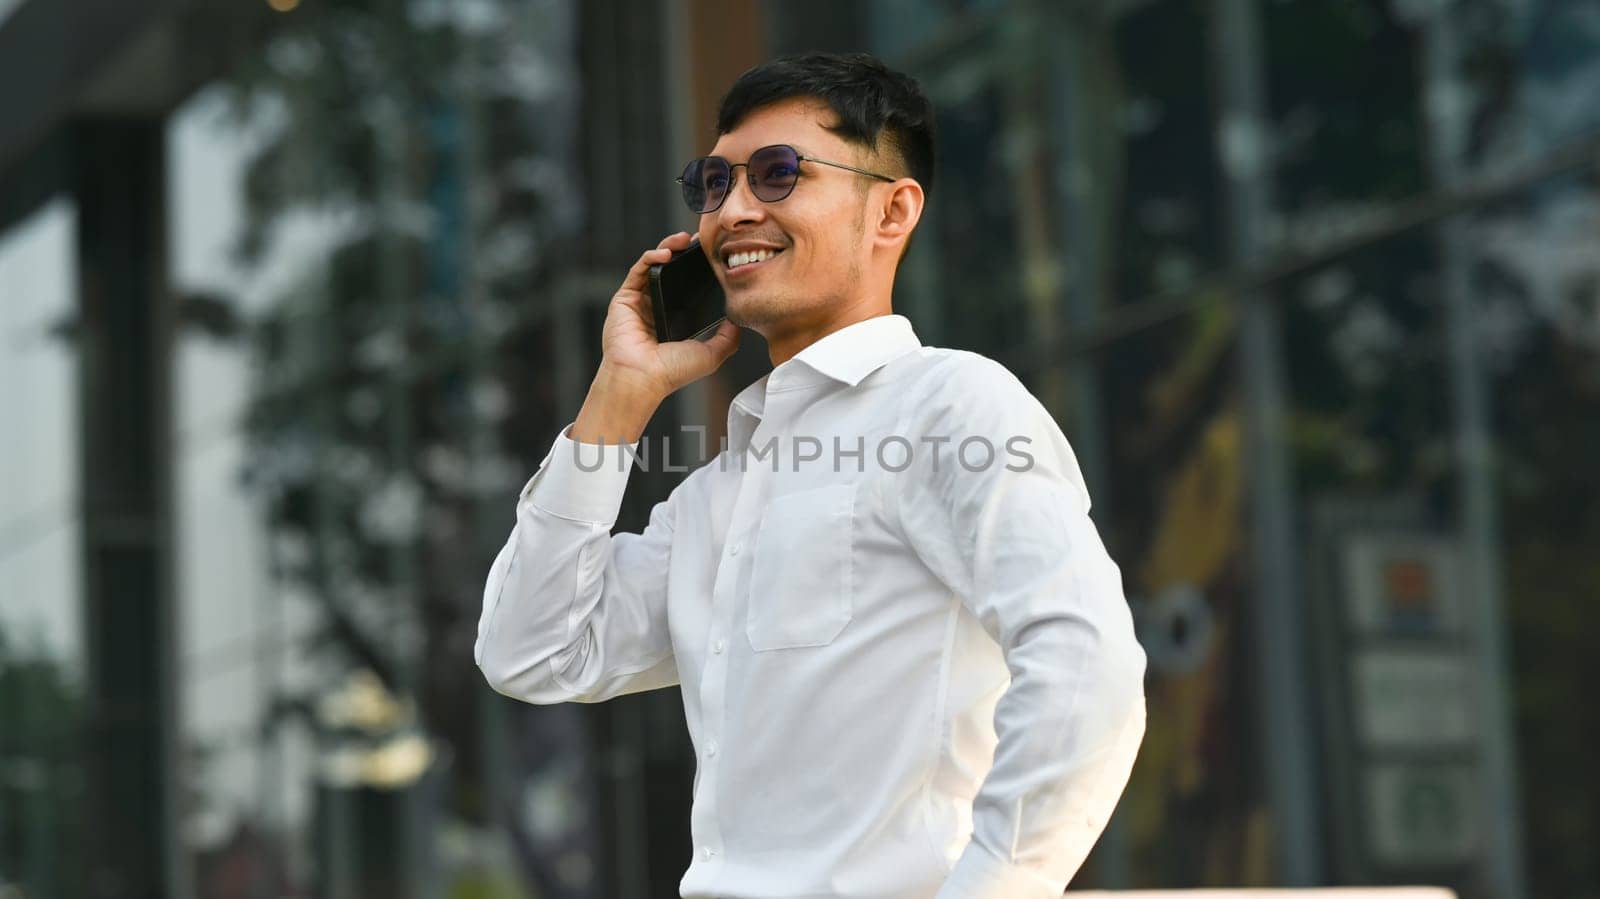 Confident businessman in white shirt talking on mobile phone while standing outside of office in urban city.